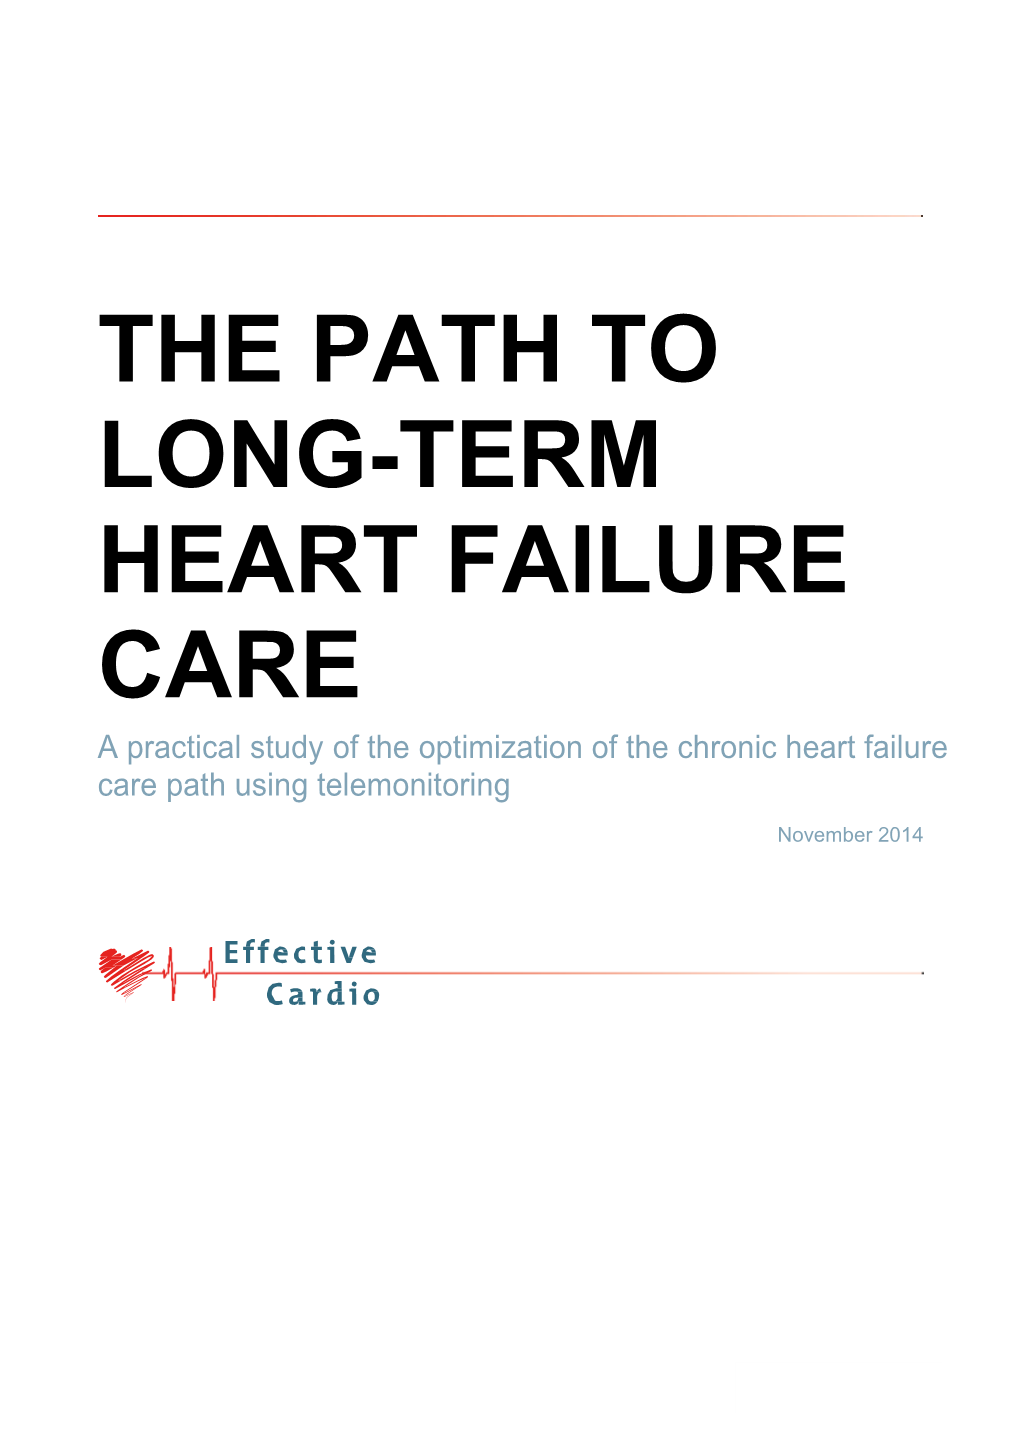 THE PATH to LONG-TERM HEART FAILURE CARE a Practical Study of the Optimization of the Chronic Heart Failure Care Path Using Telemonitoring